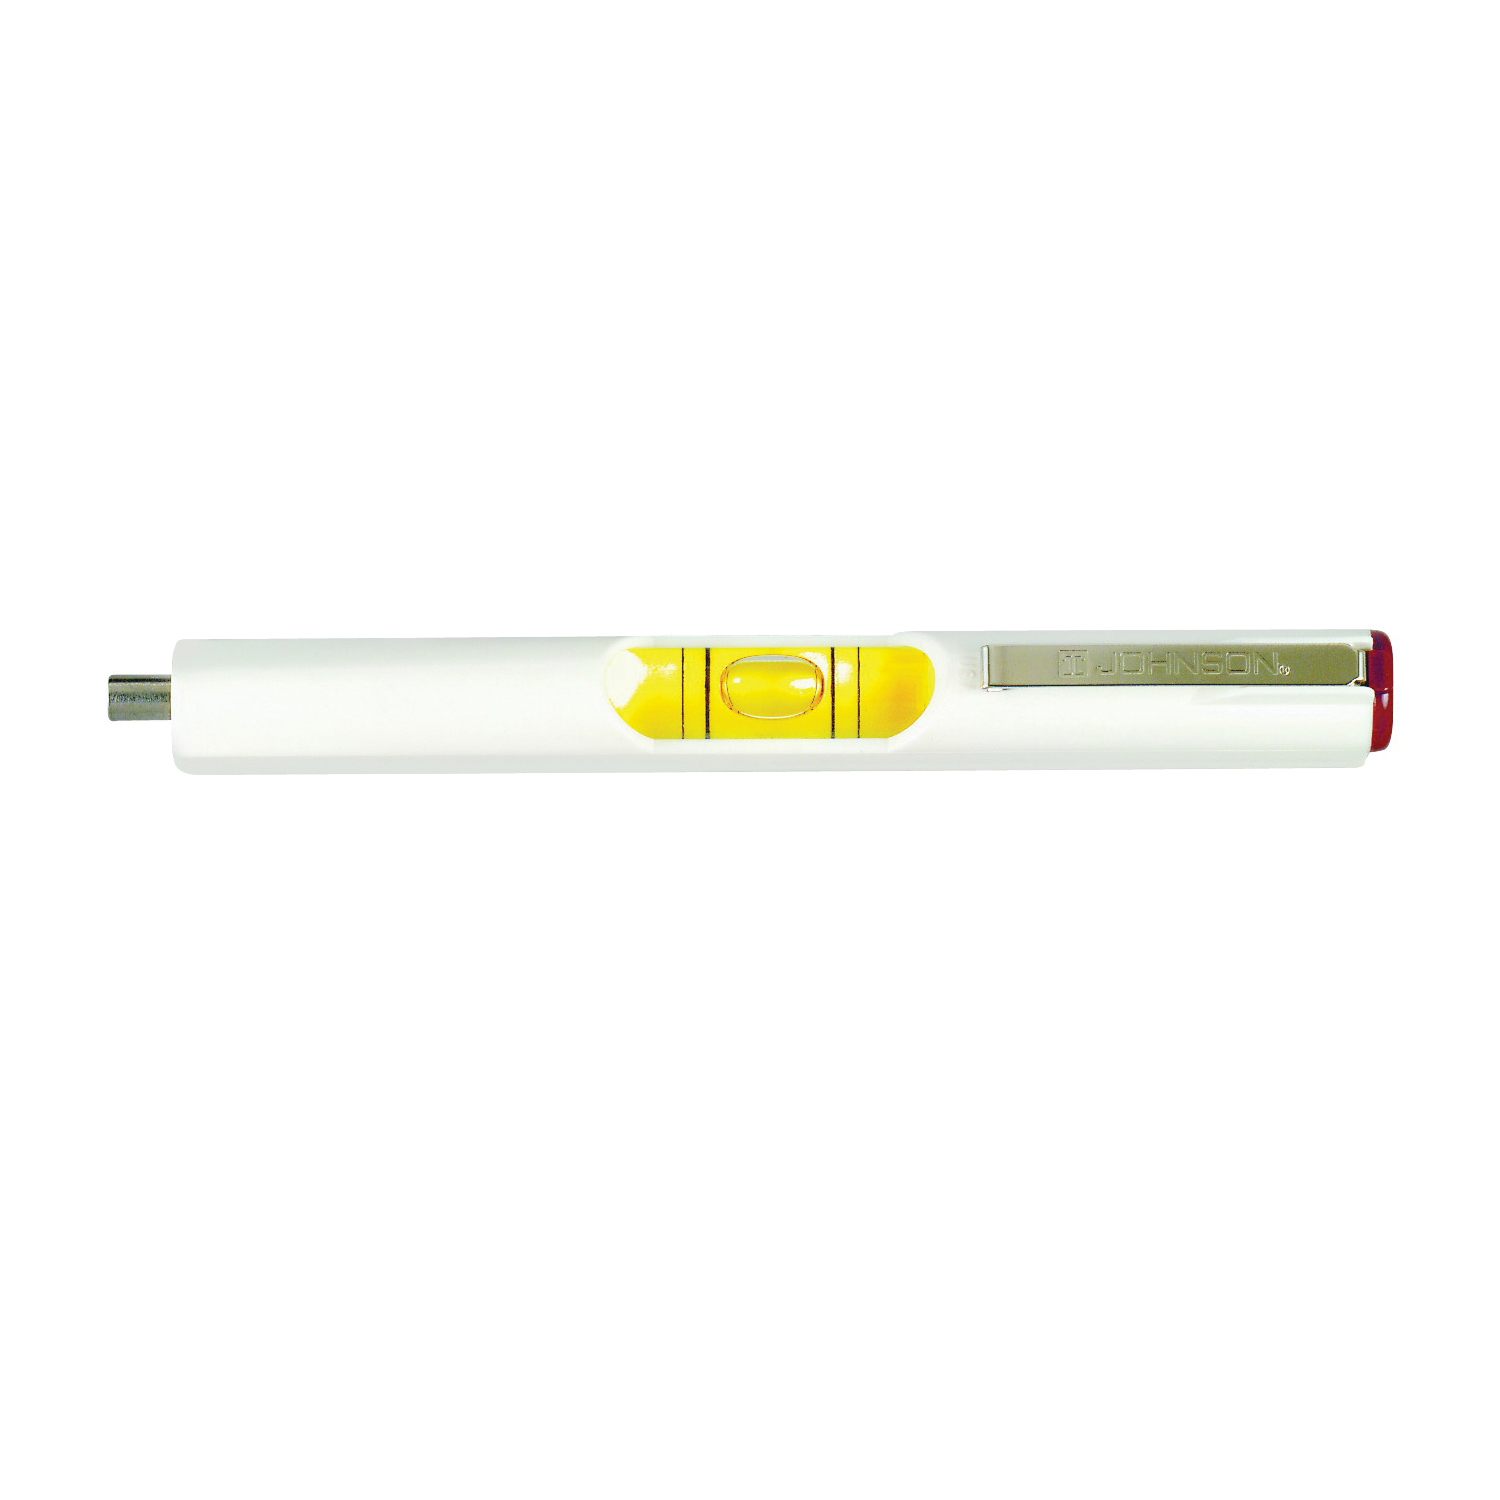 500 Pocket Level with Magnetic Pick-Up, 5 in L, 1-Vial, Plastic